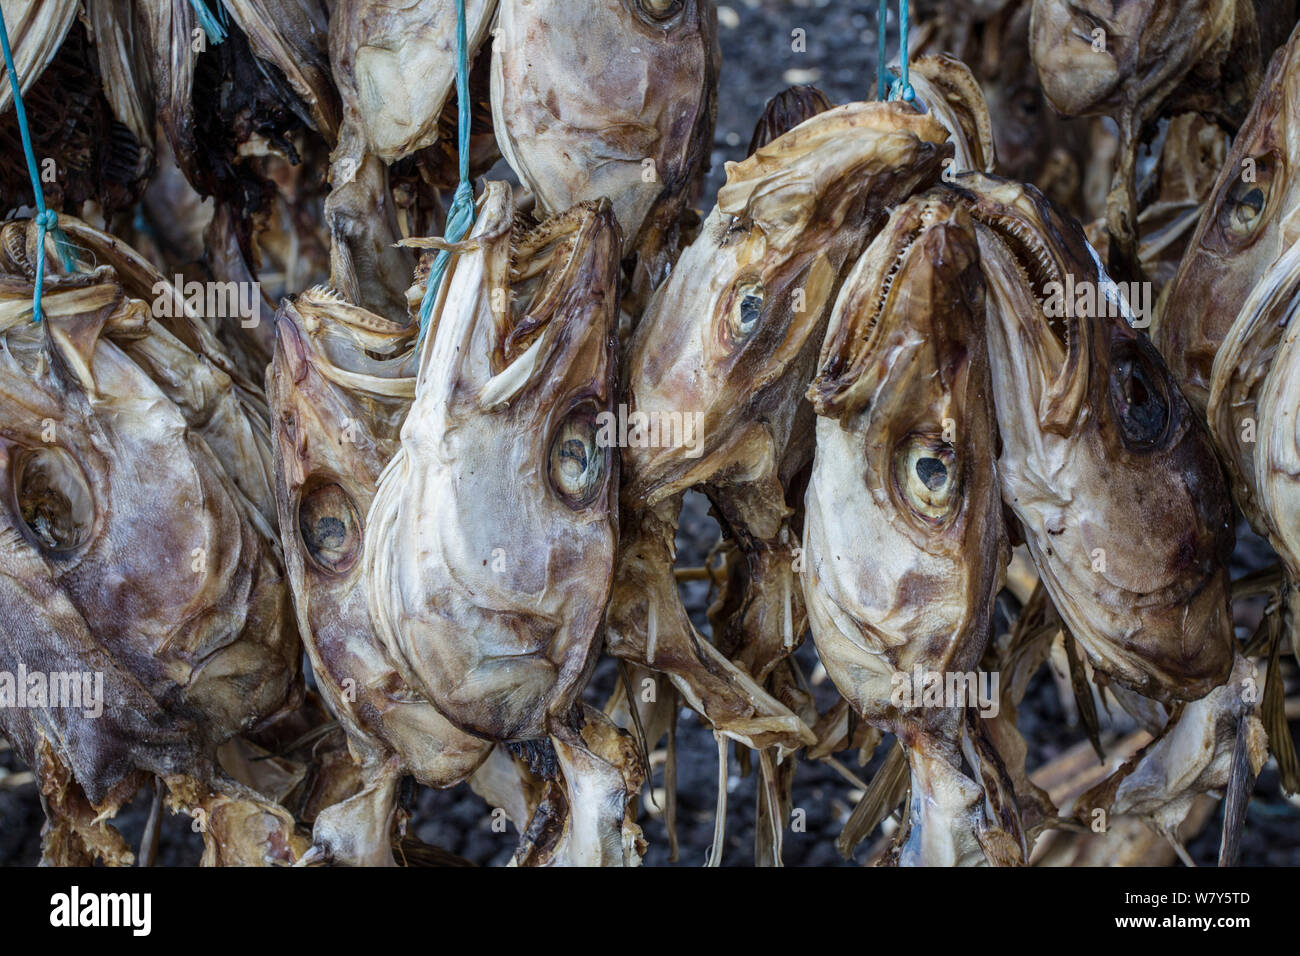 Atlantic cod (Gadus morhua) heads and skeletons drying on racks. Most of these are destined for markets in Nigeria. Reykjavik, Iceland. August. Stock Photo